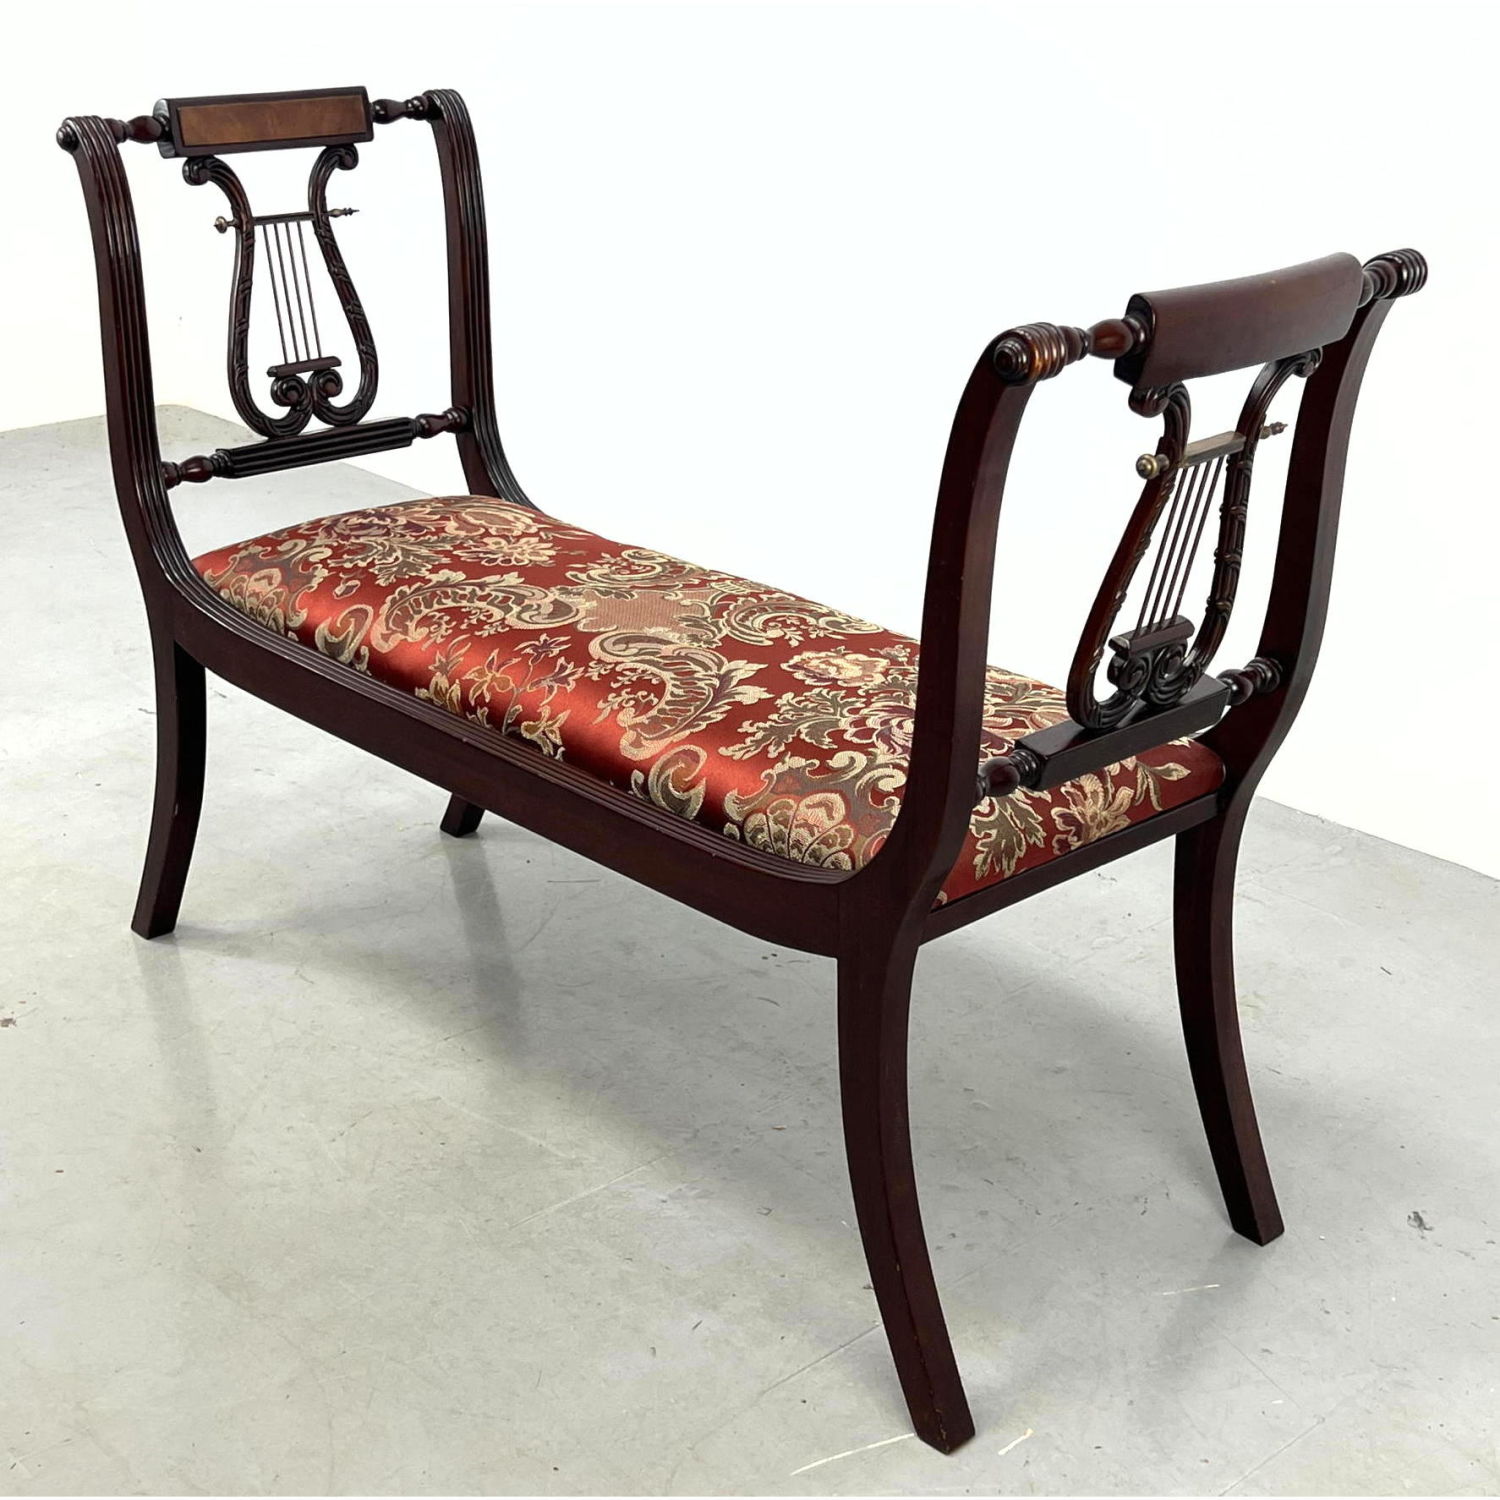 Lyre side mahogany bench with harp decoration.